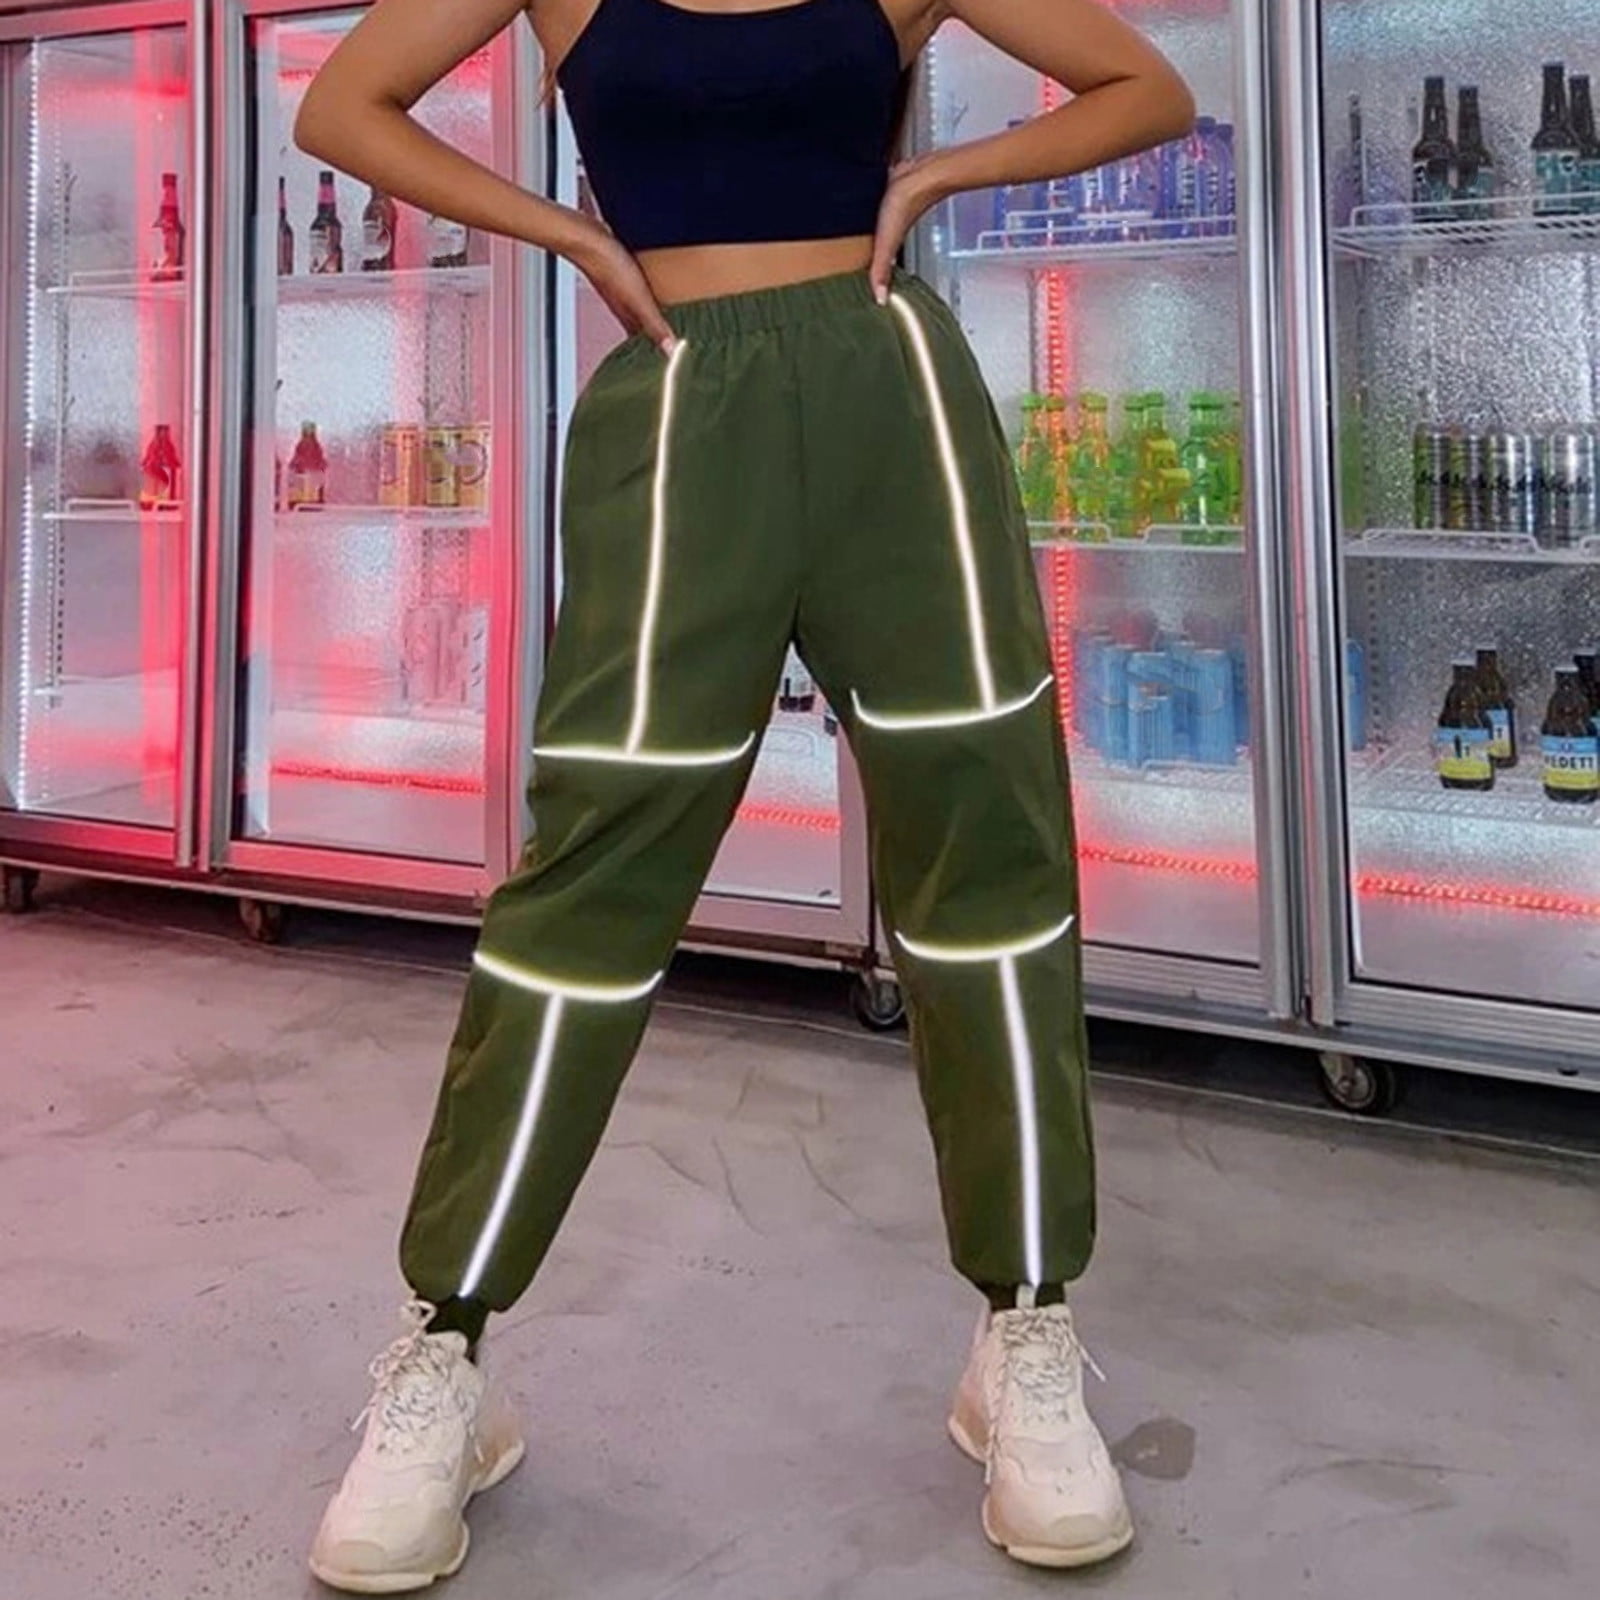 Kayannuo Cargo Pants Women Spring Summer Deals Fashion Women's Reflective  Strip Beam Pants Casual Sports Trousers Cargo Pants Green